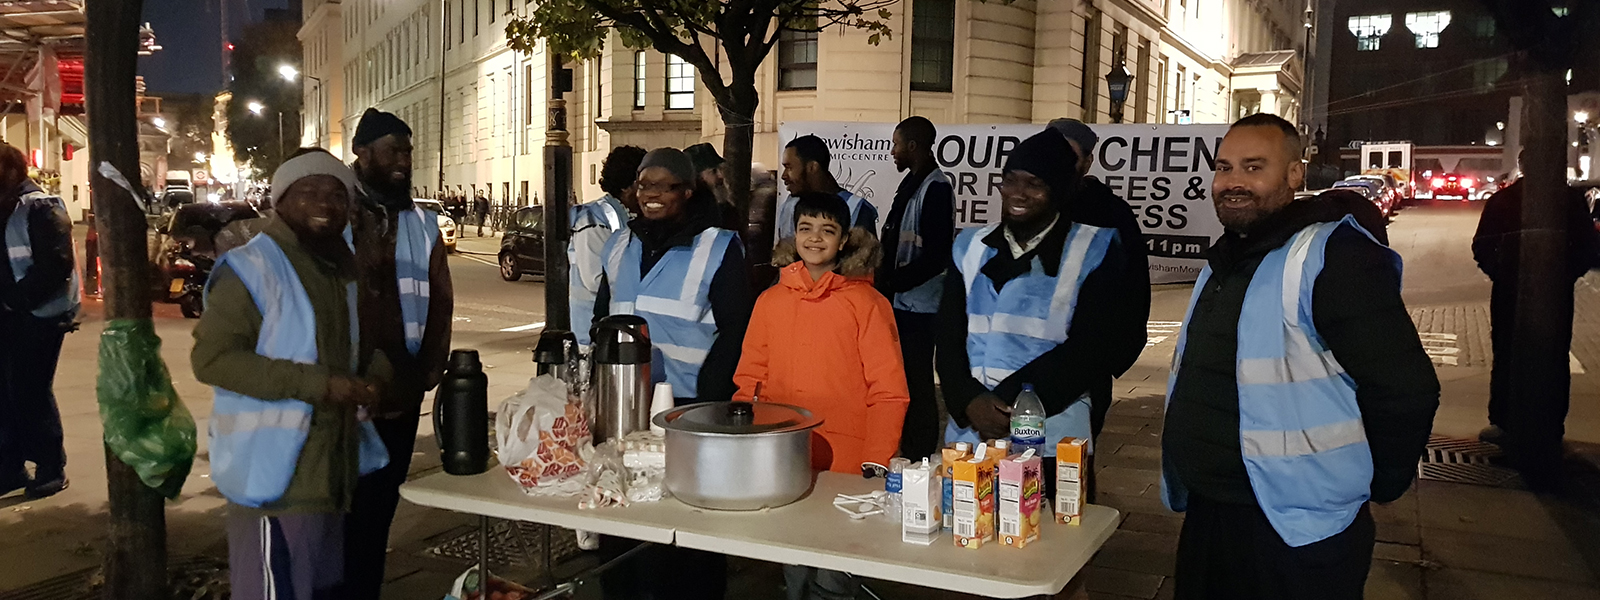 Soup Kitchen For Homeless Press Release 19 12 2016 